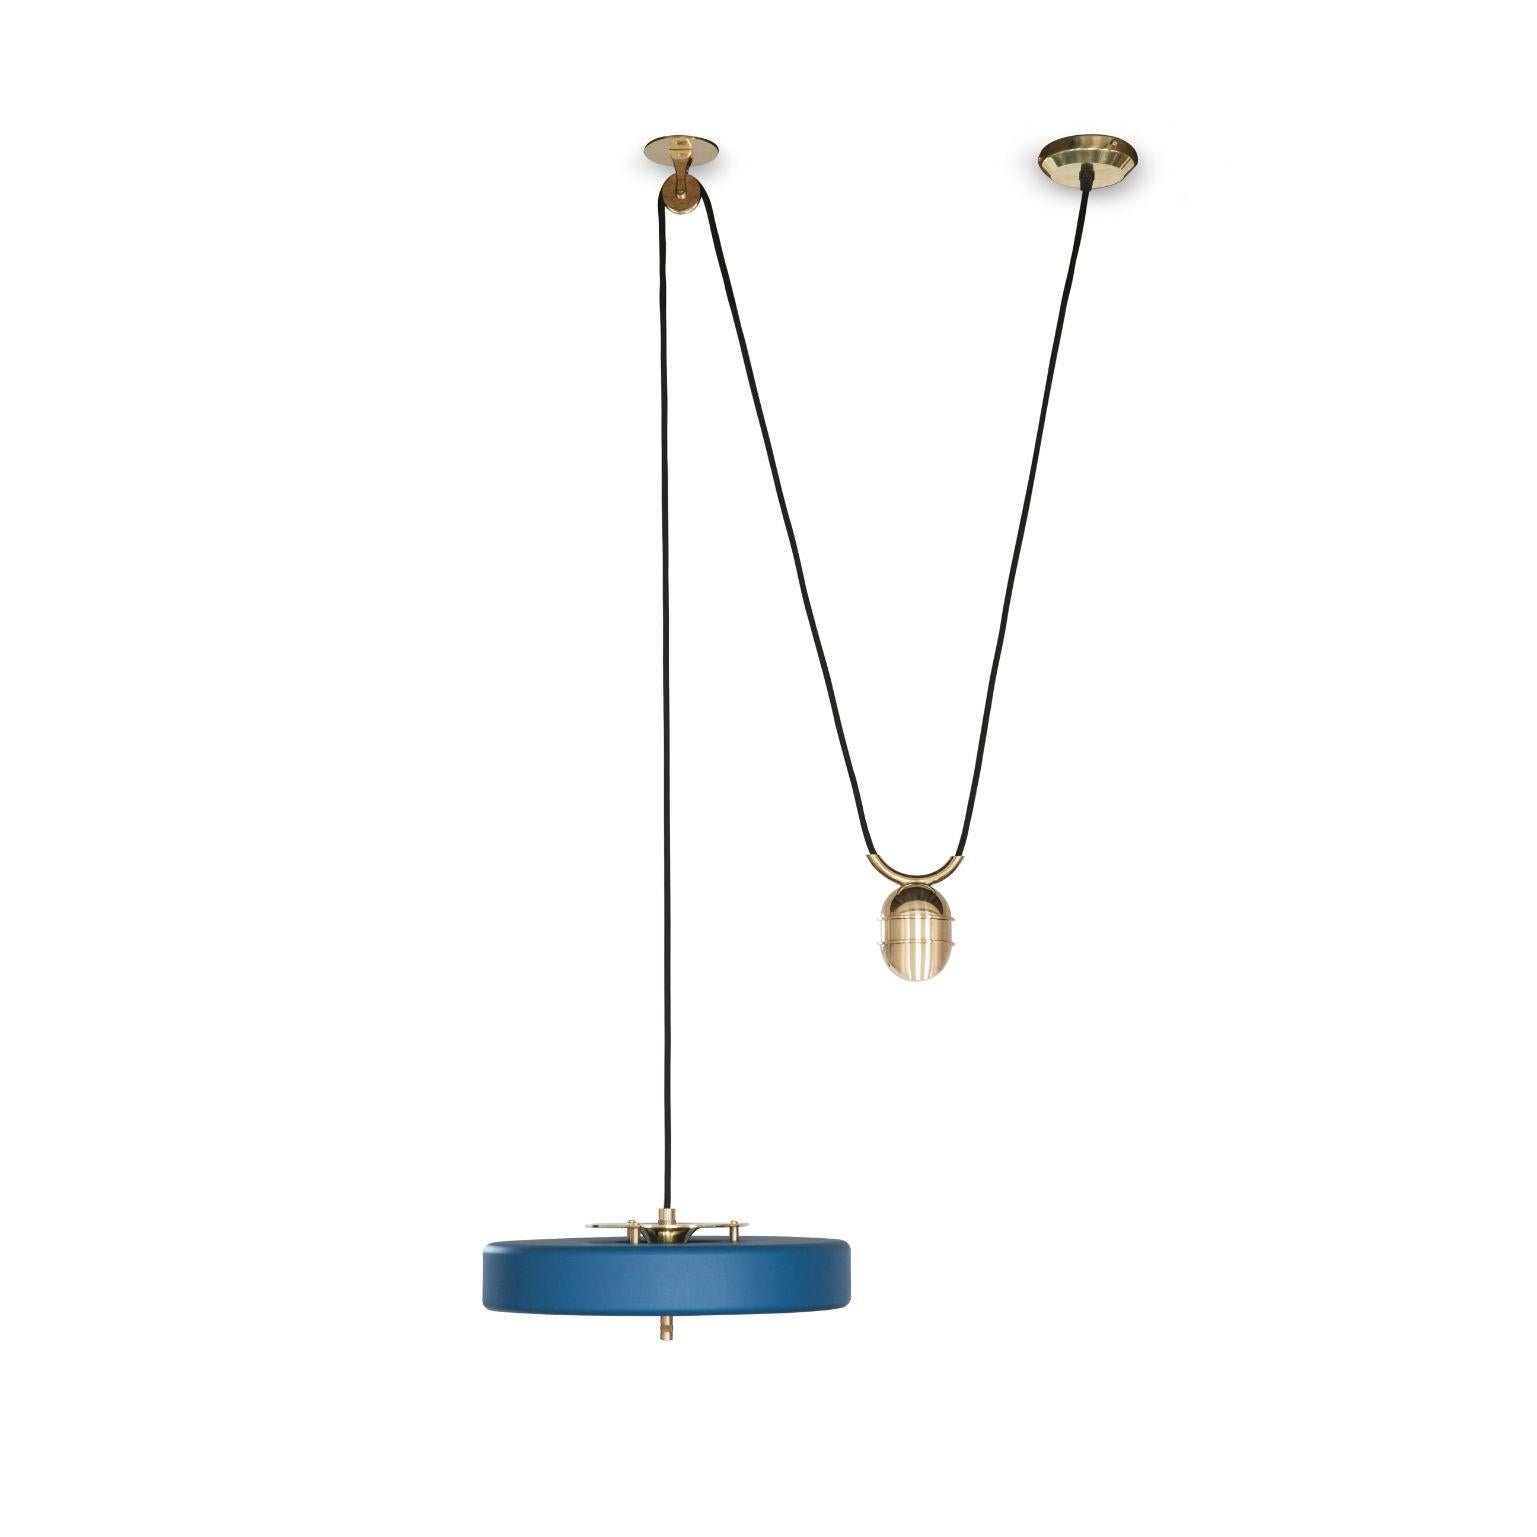 Revolve Rise and fall pendant light - Polished brass - Blue by Bert Frank
Dimensions: 30 x 35 x 11 cm, small lamp: 7.6 cm
Materials: Brass, steel

Also Available in brushed brass
When Adam Yeats and Robbie Llewellyn founded Bert Frank in 2013